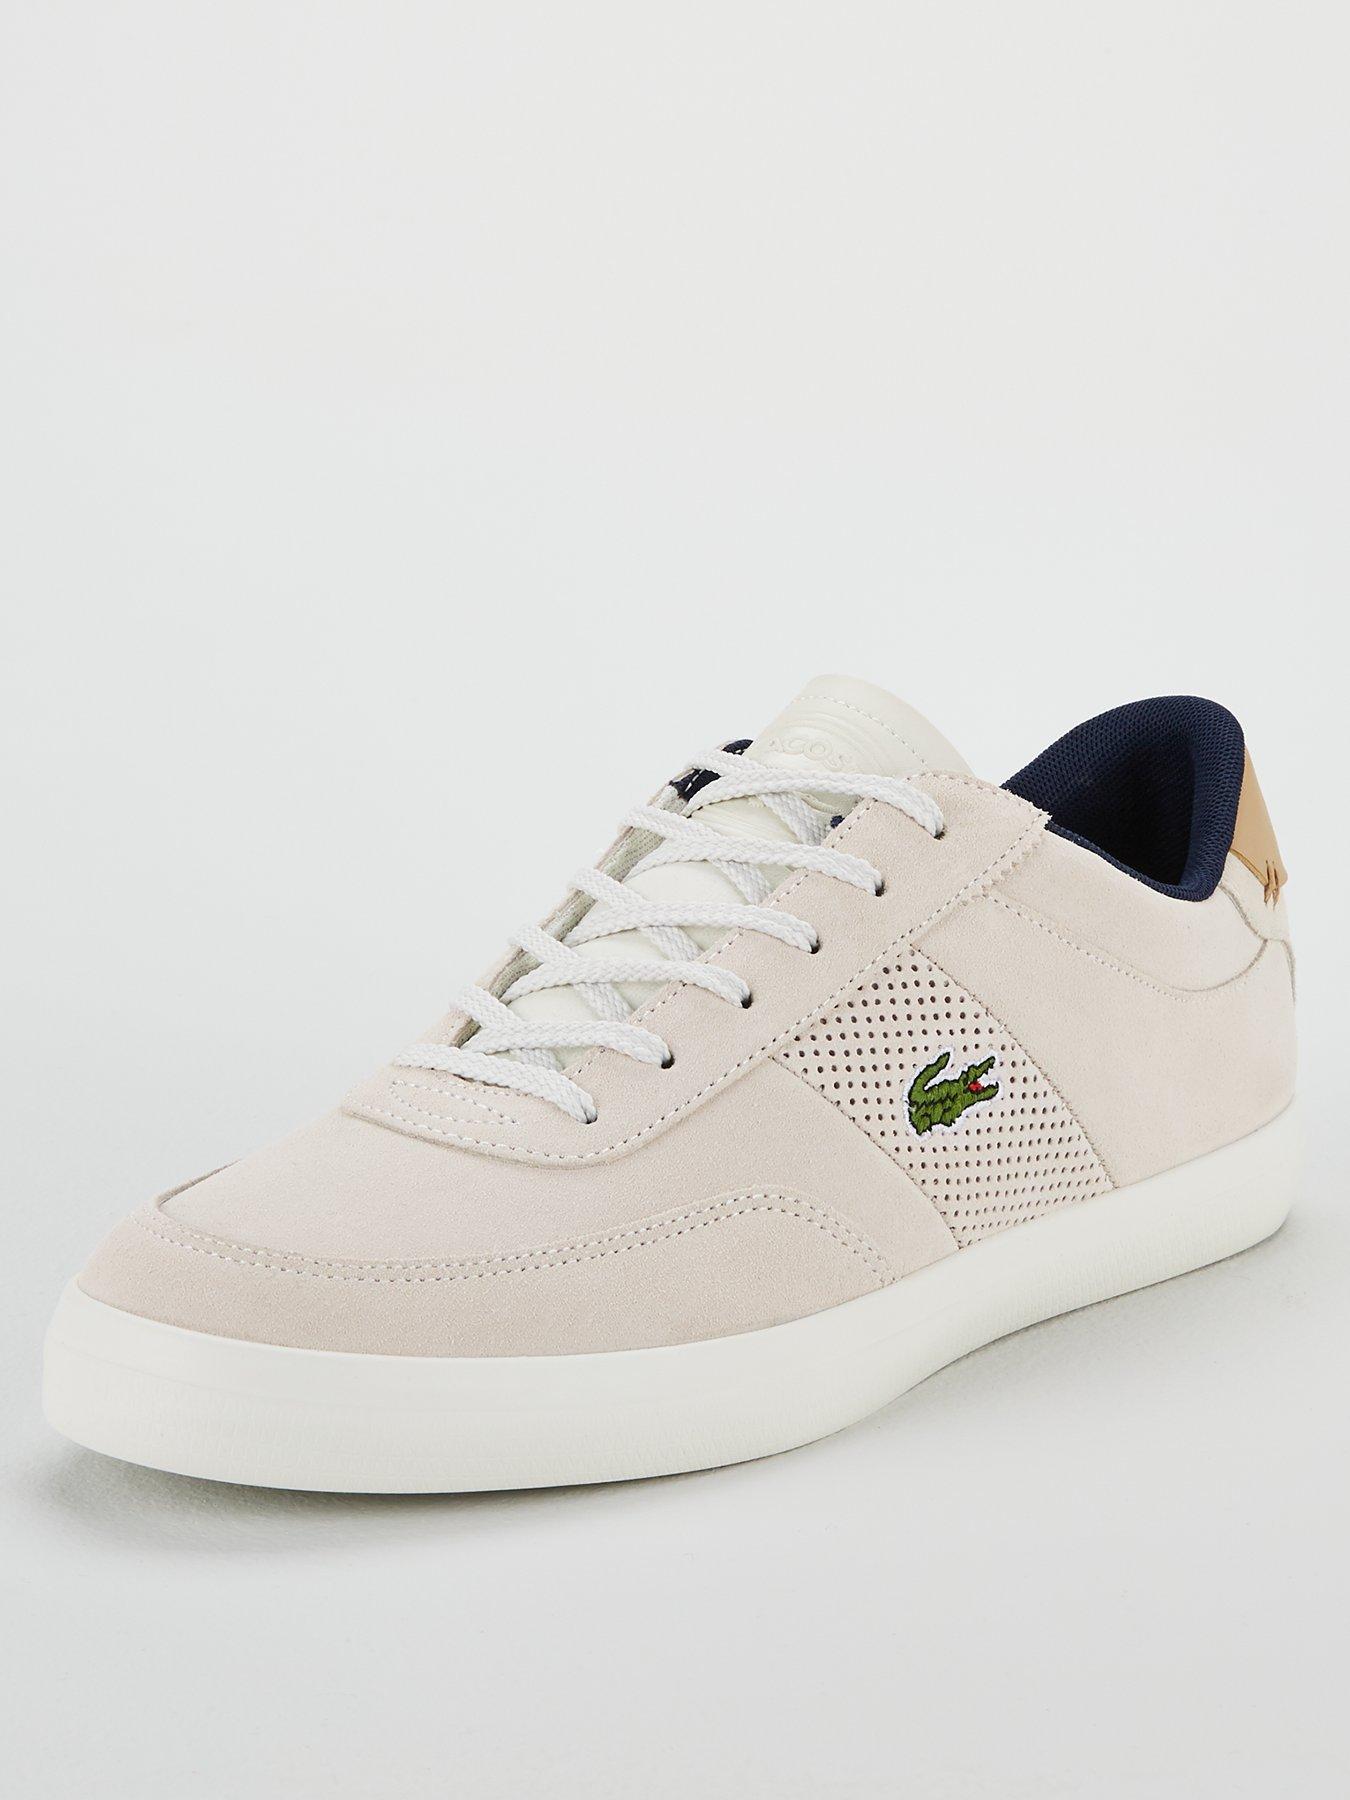 lacoste court master 418 low cost 1bef2 